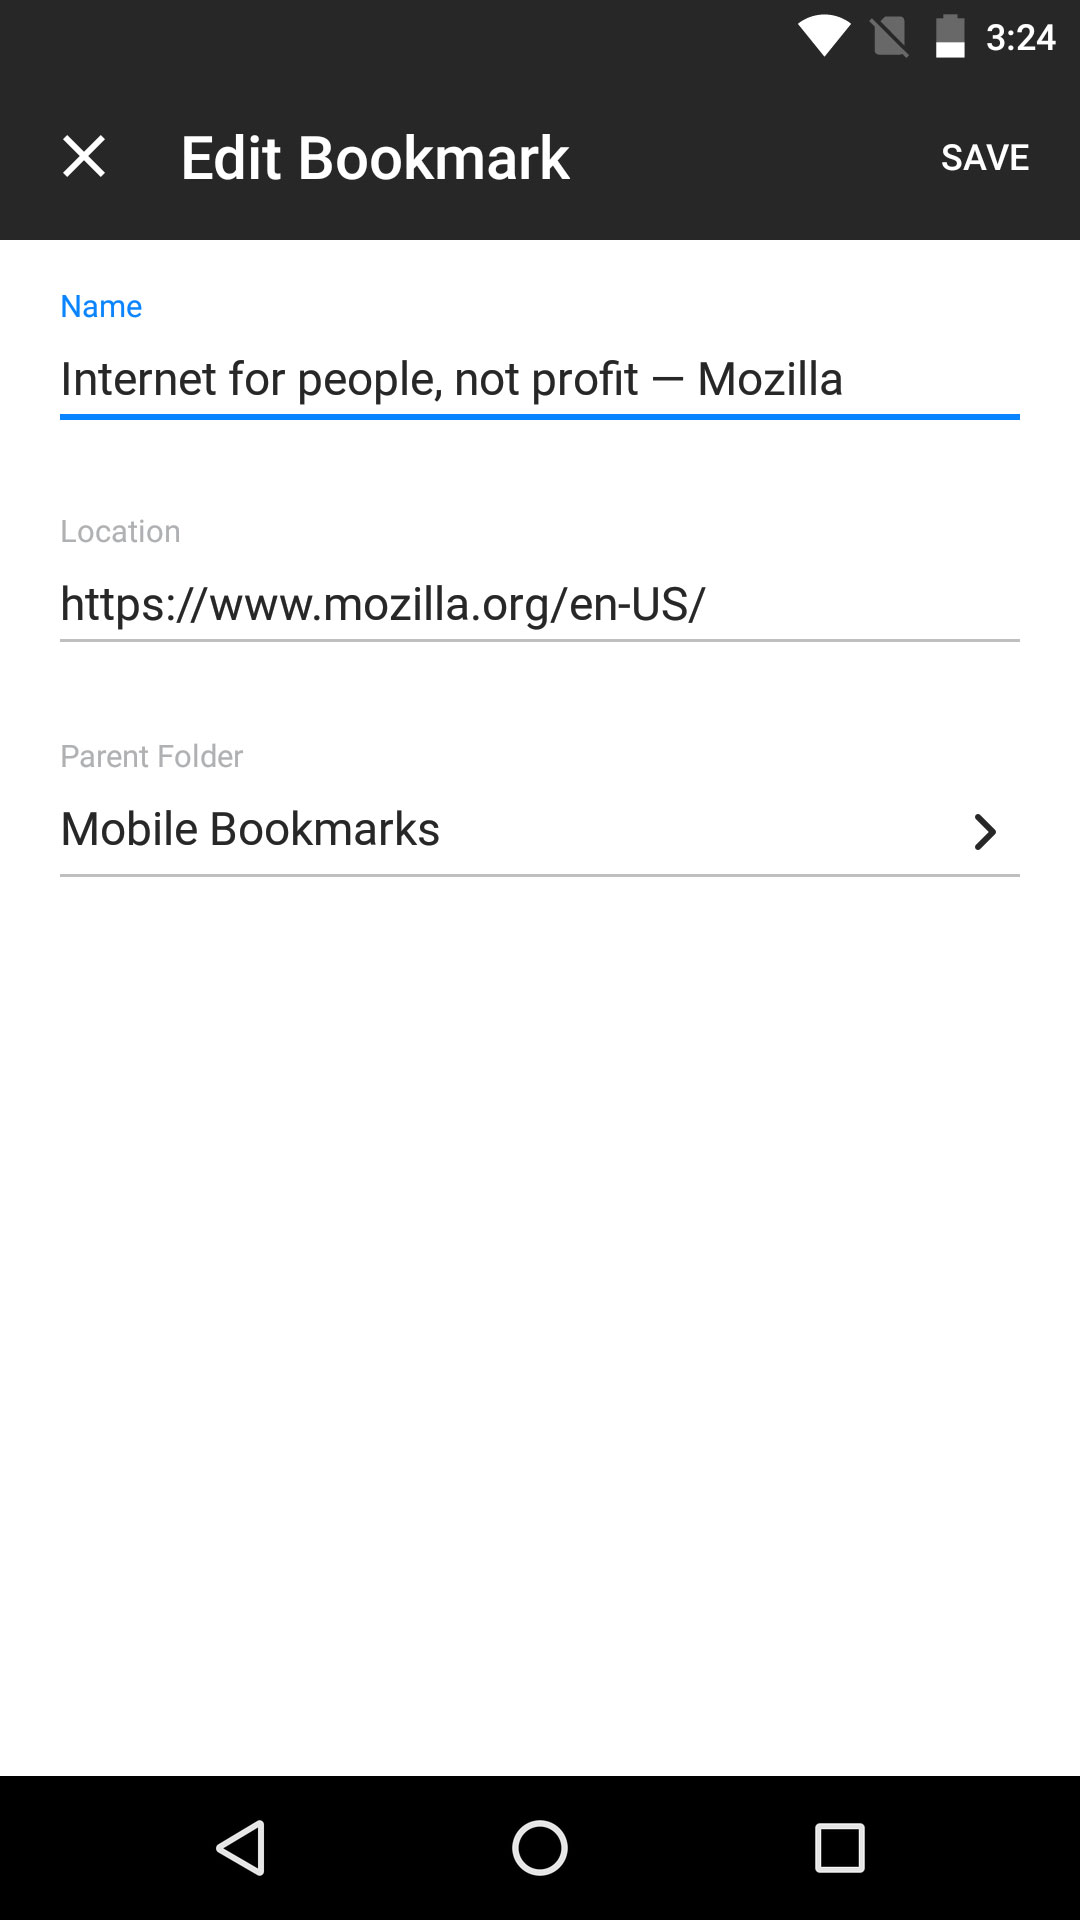 Firefox for Android interface for editing a bookmark.